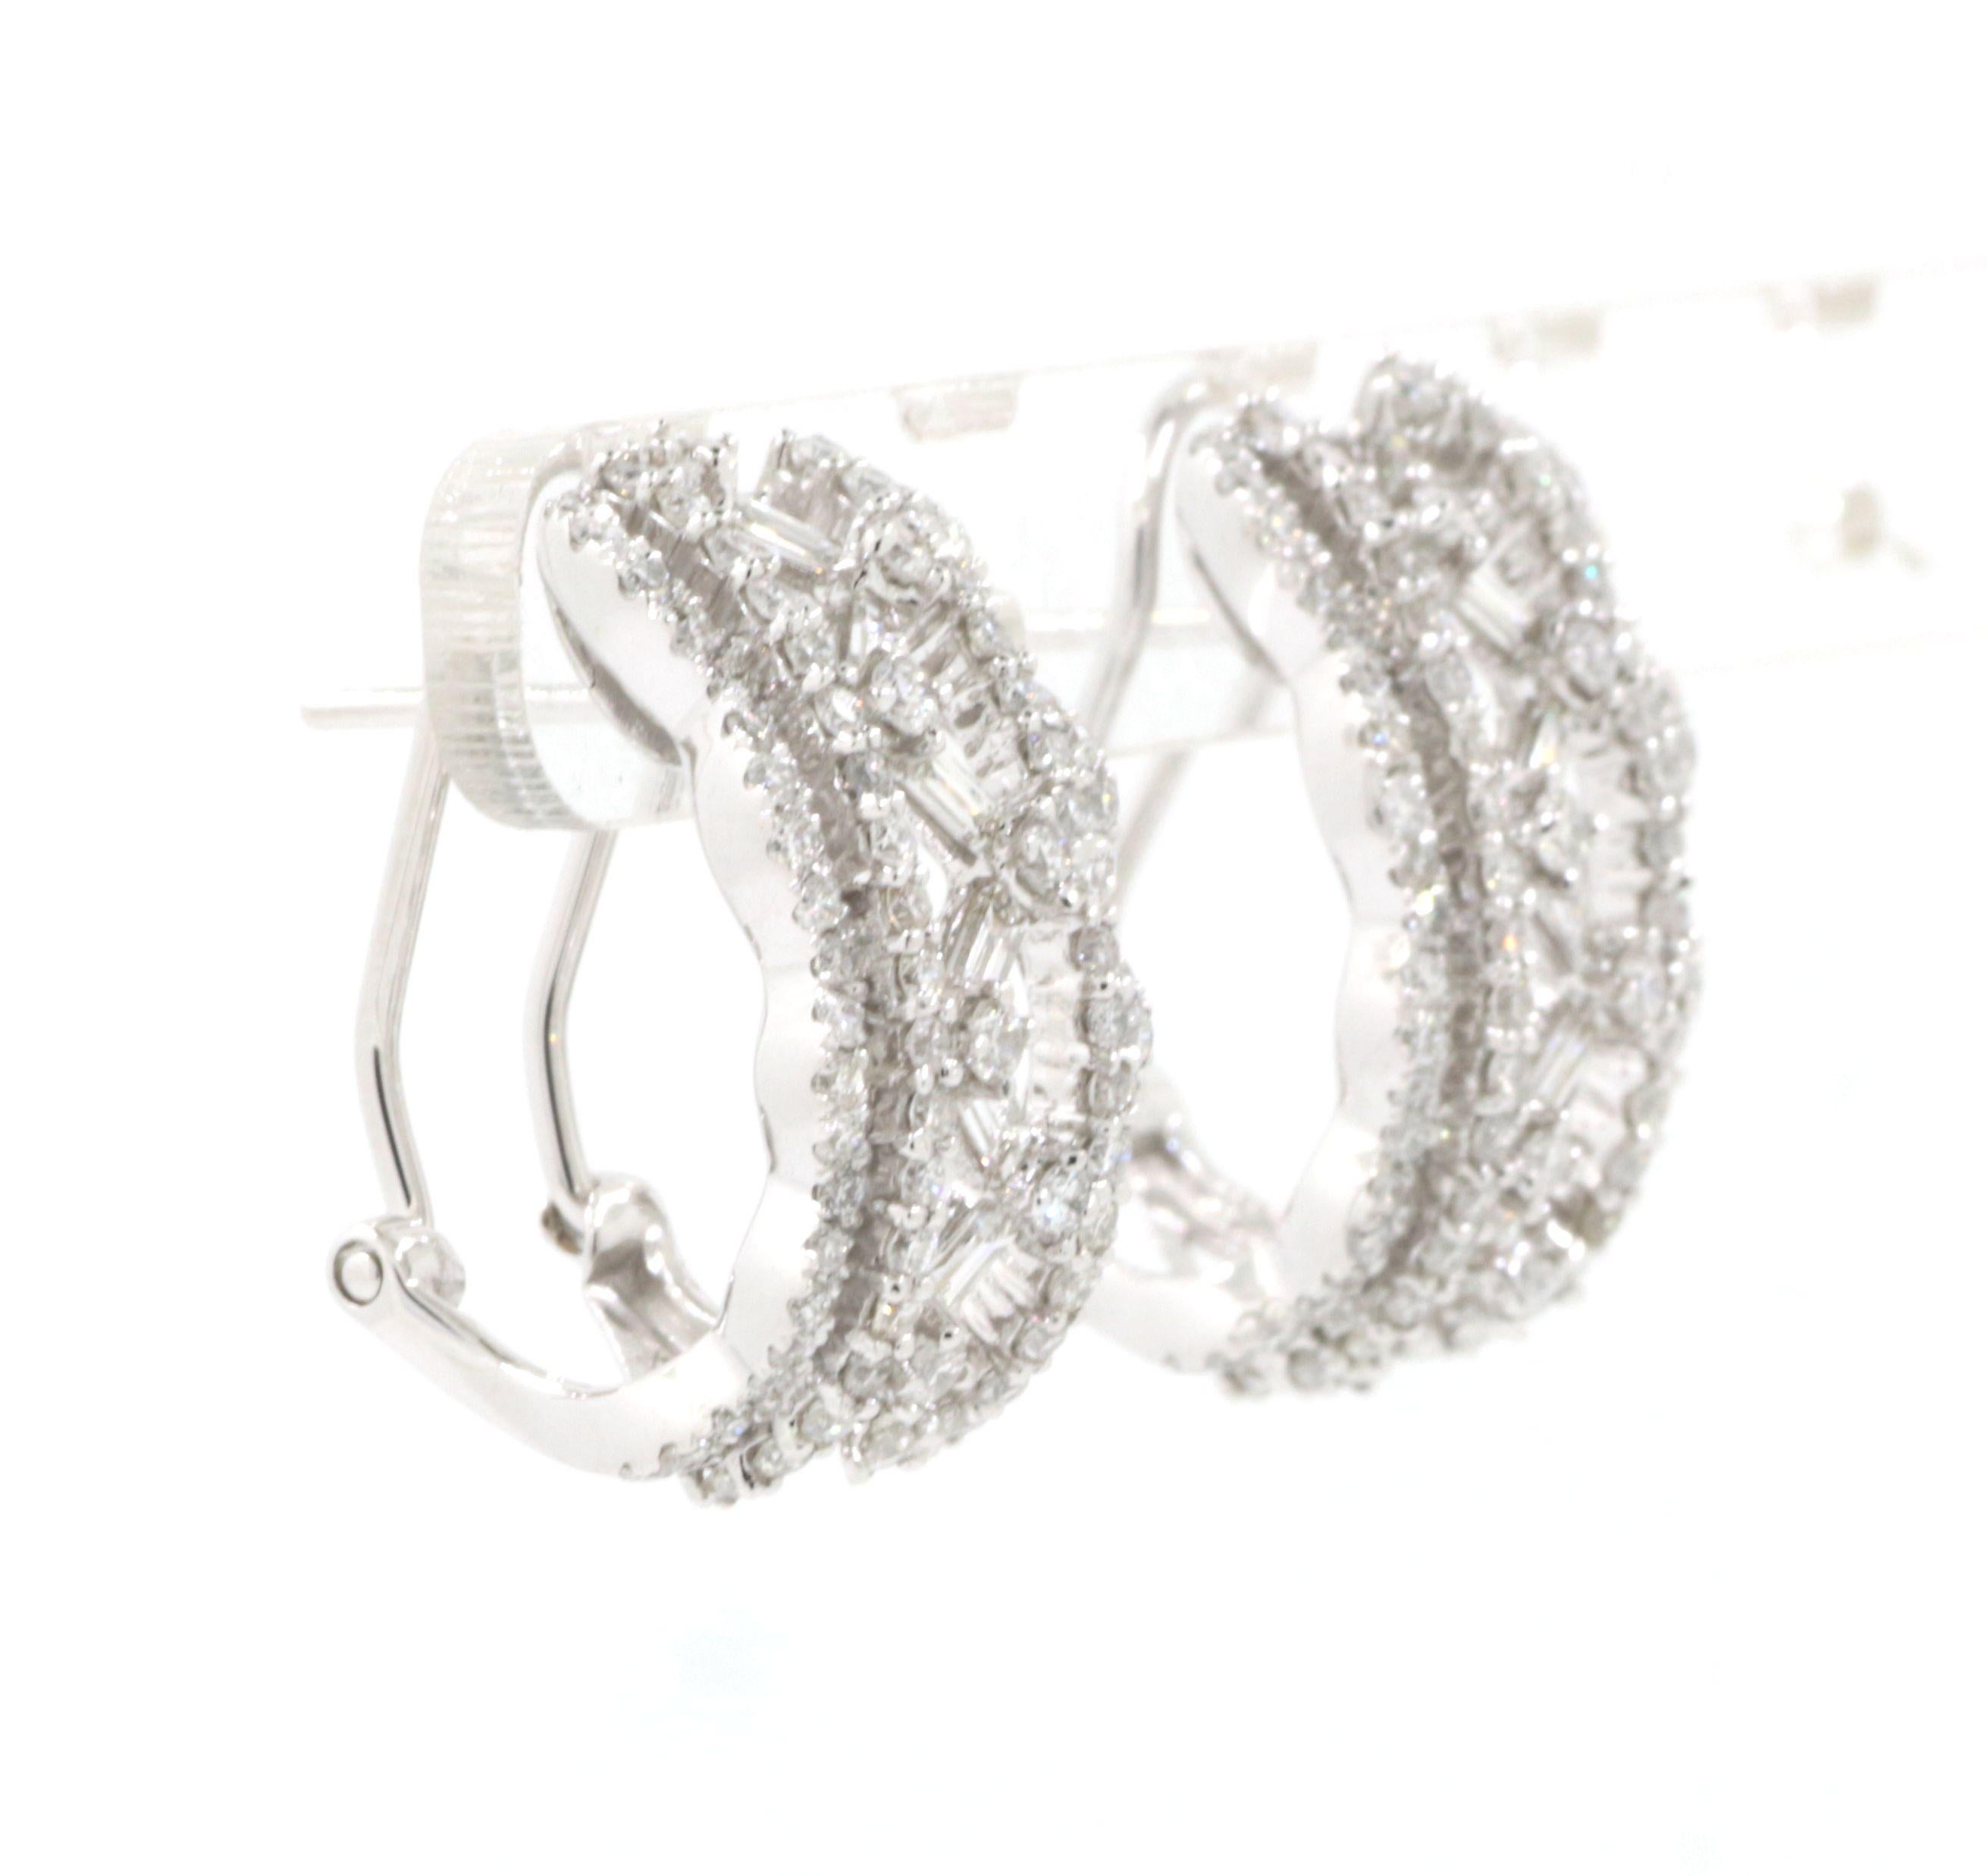 These stunning earrings exude sophistication, meticulously crafted from 18K white gold. The design showcases a captivating interplay of shapes and light, featuring both baguette and round cut diamonds.

The baguette diamonds, totaling 0.41 carats,